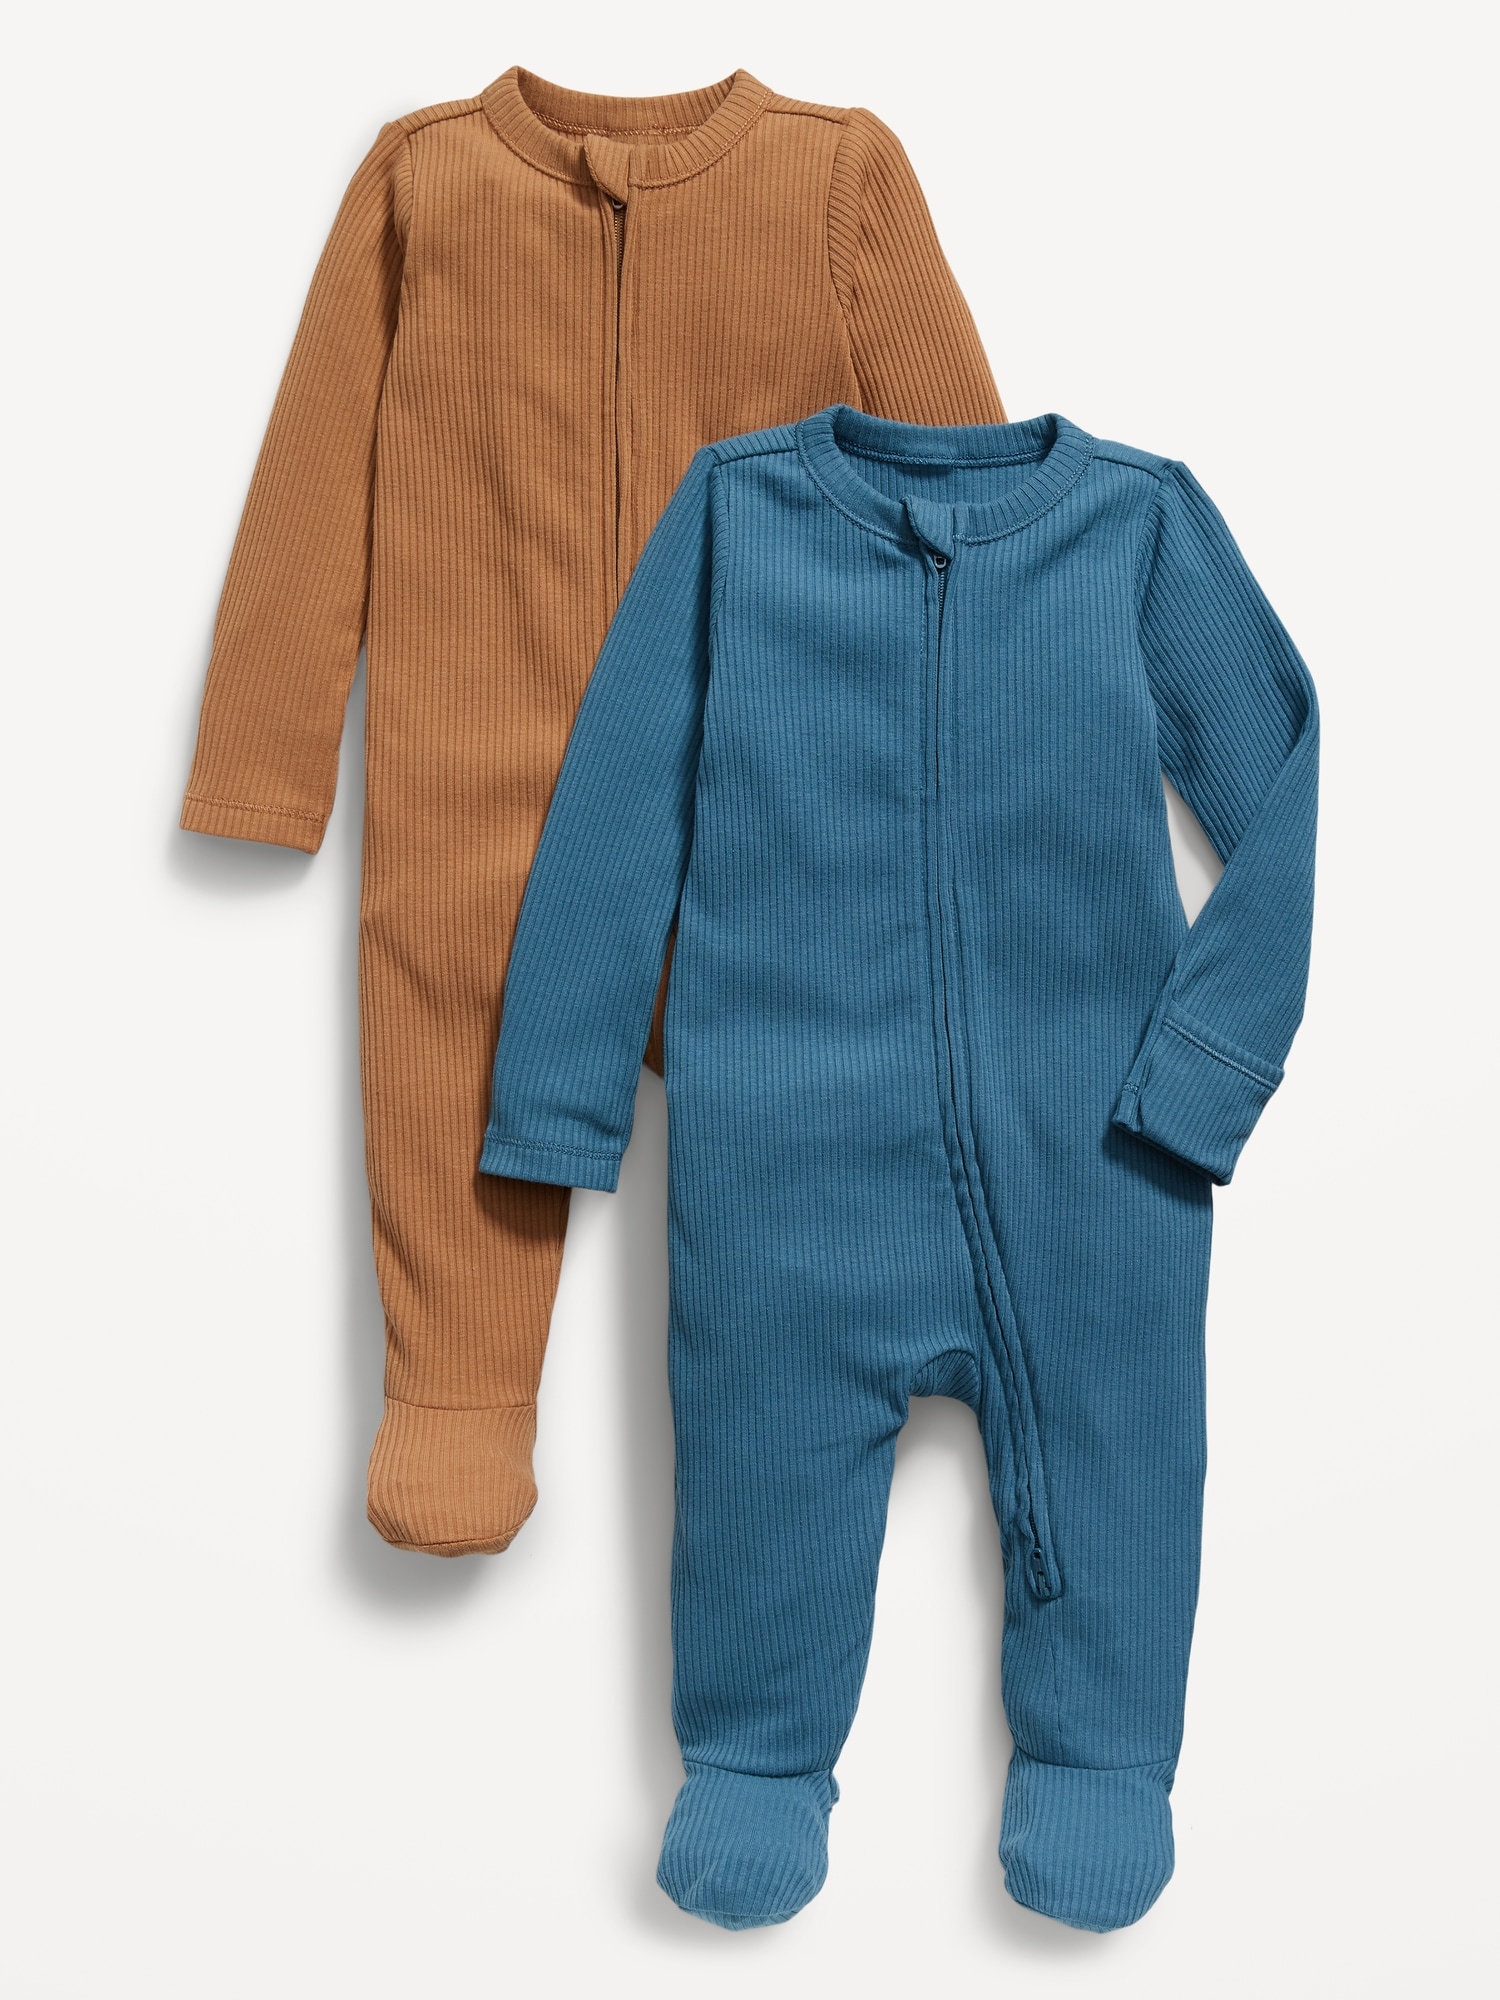 Oldnavy Unisex Sleep & Play 2-Way-Zip Footed One-Piece 2-Pack for Baby Hot Deal